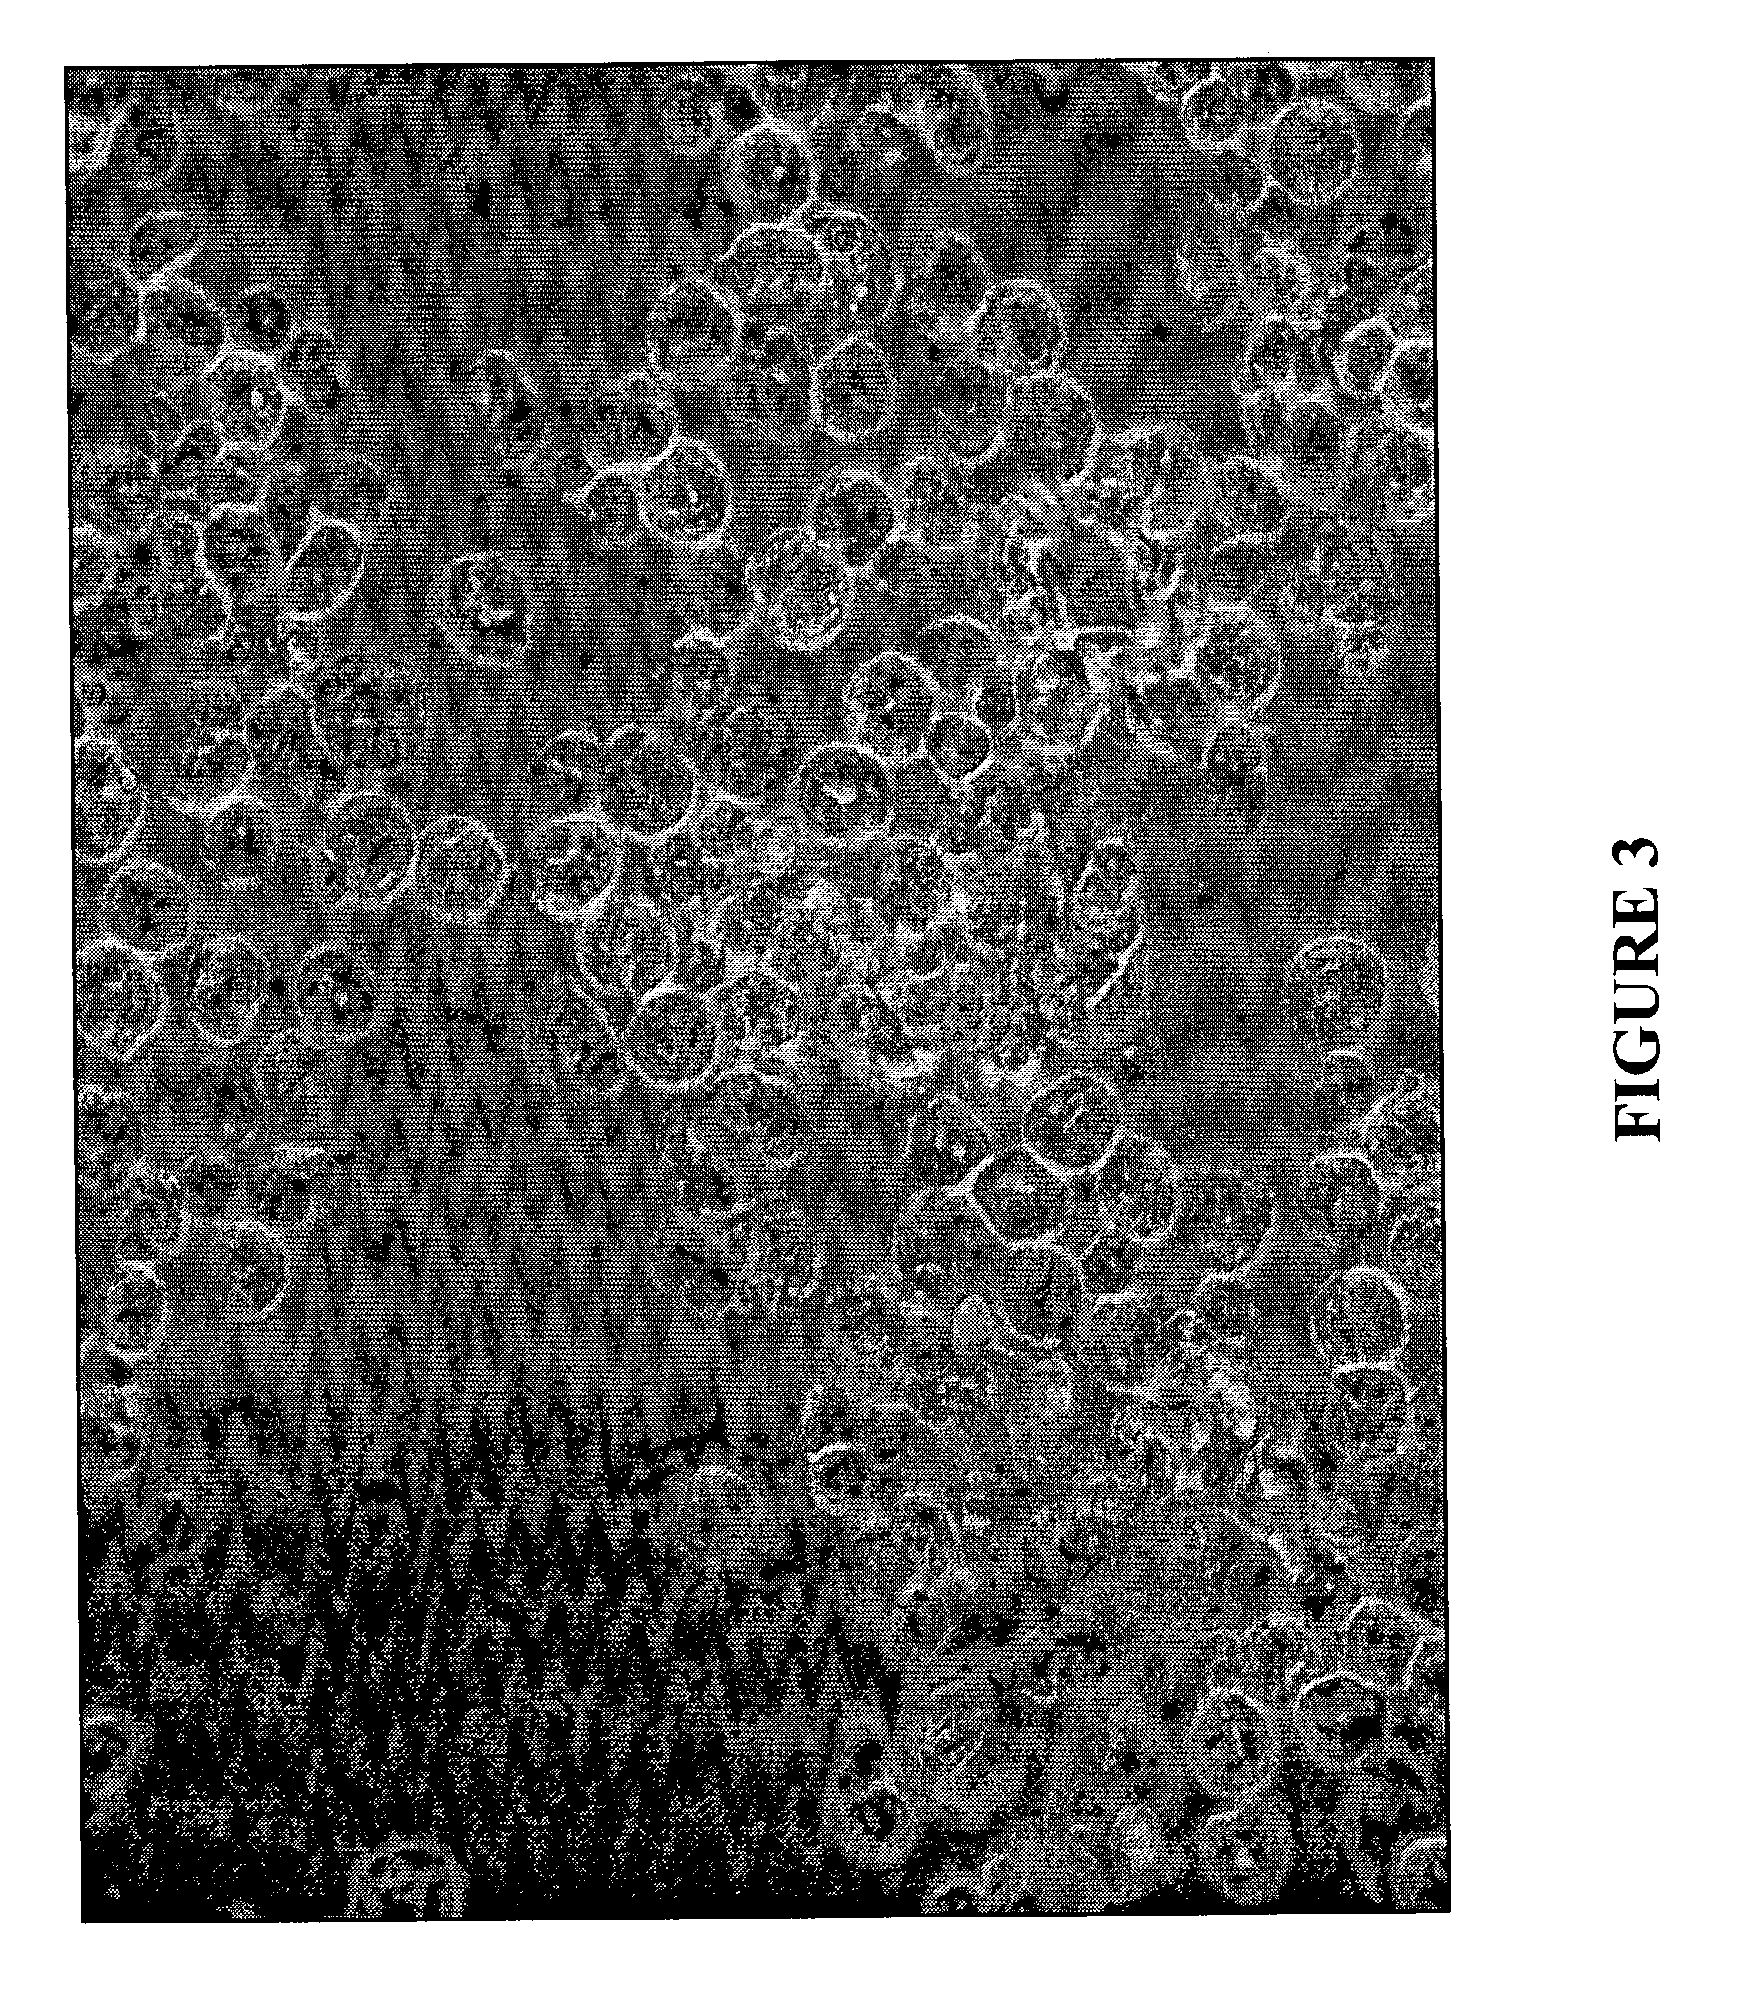 Composition and method for culturing potentially regenerative cells and functional tissue-organs in vitro